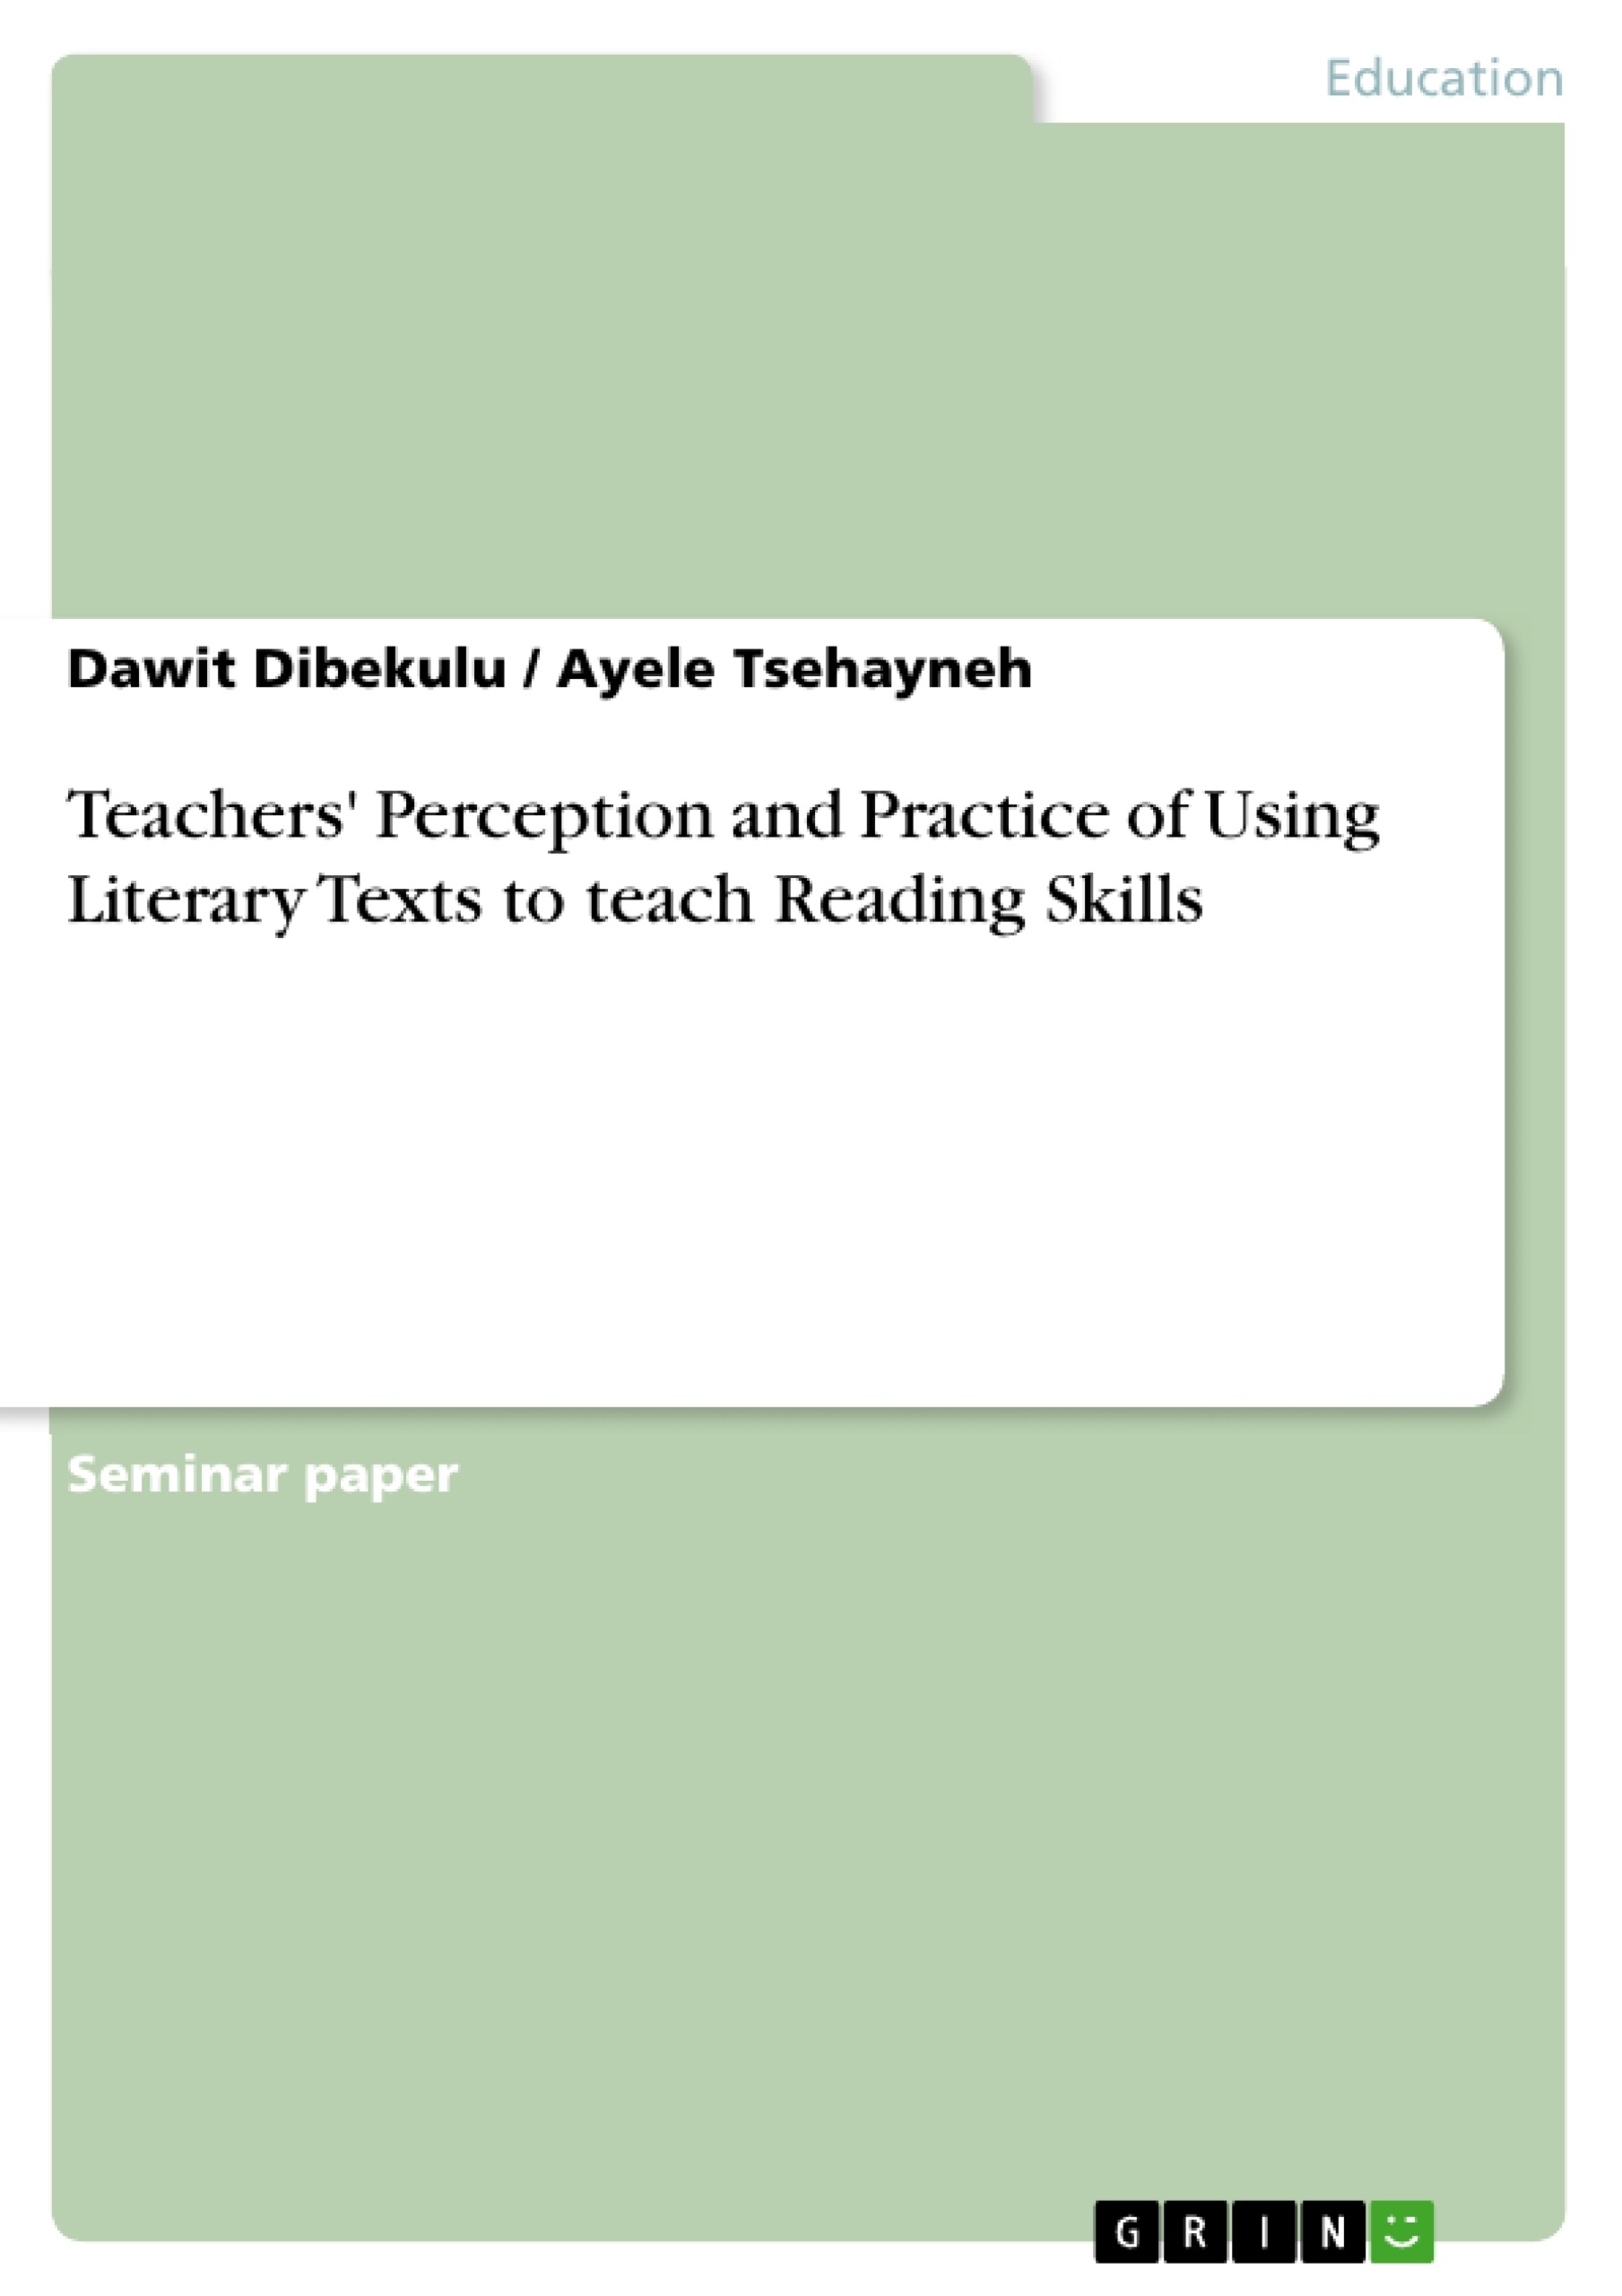 Title: Teachers' Perception and Practice of Using Literary Texts to teach Reading Skills